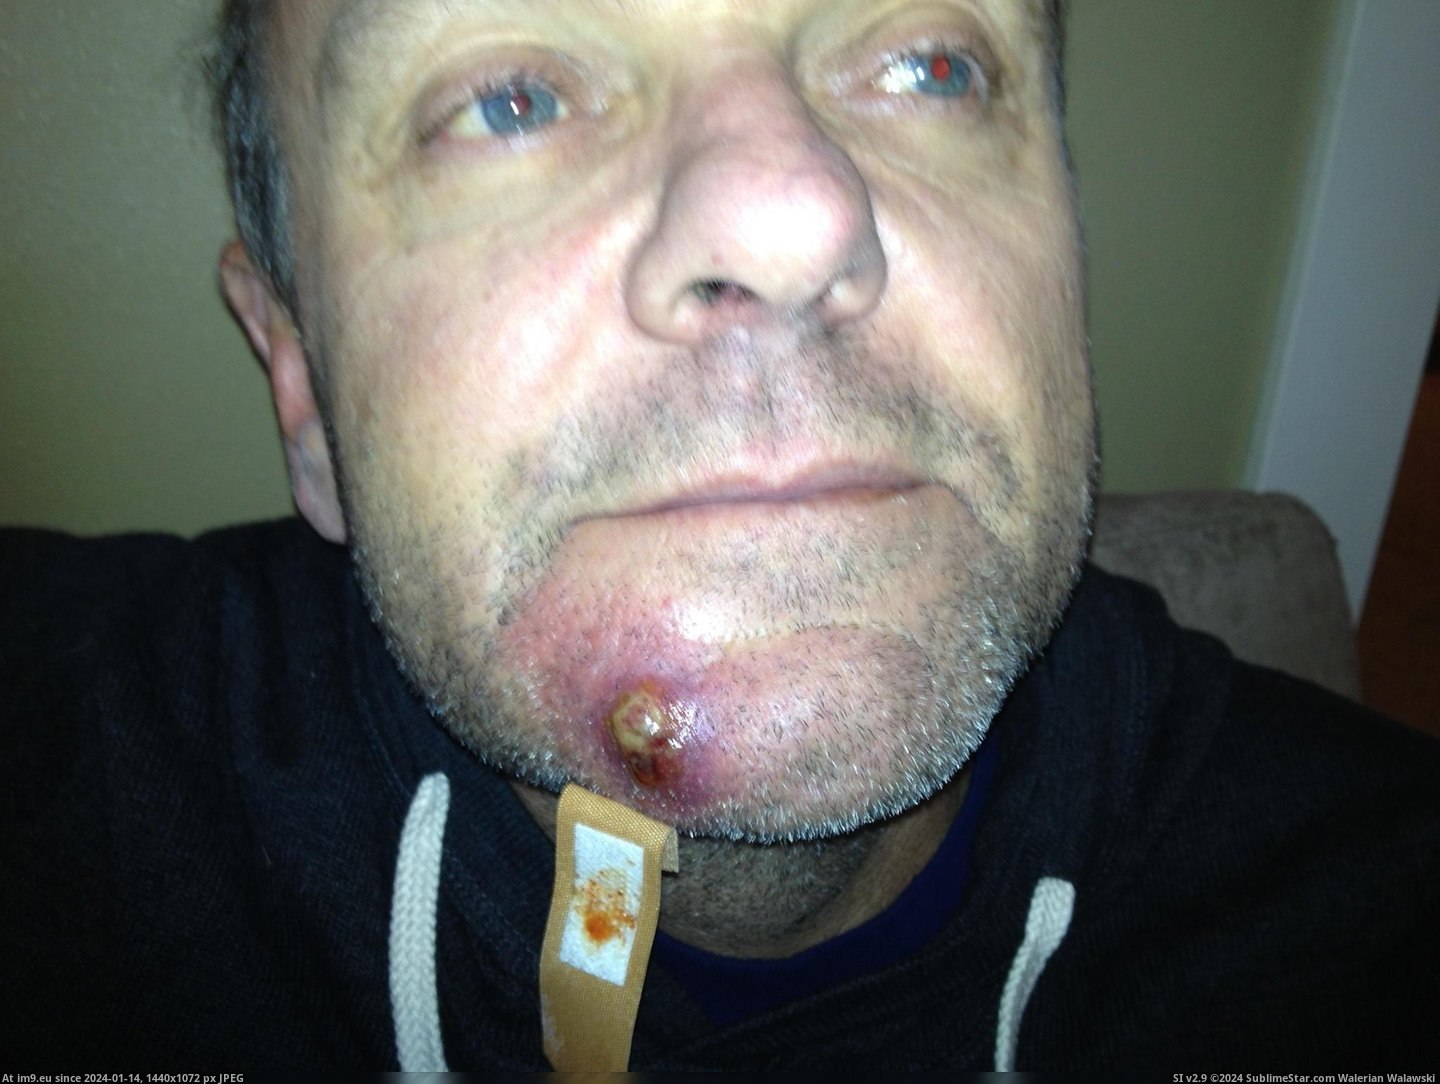 #Wtf #Dad #Ingrown #Whisker #Infection #Staff [Wtf] My dad's ingrown whisker + staff infection Pic. (Image of album My r/WTF favs))